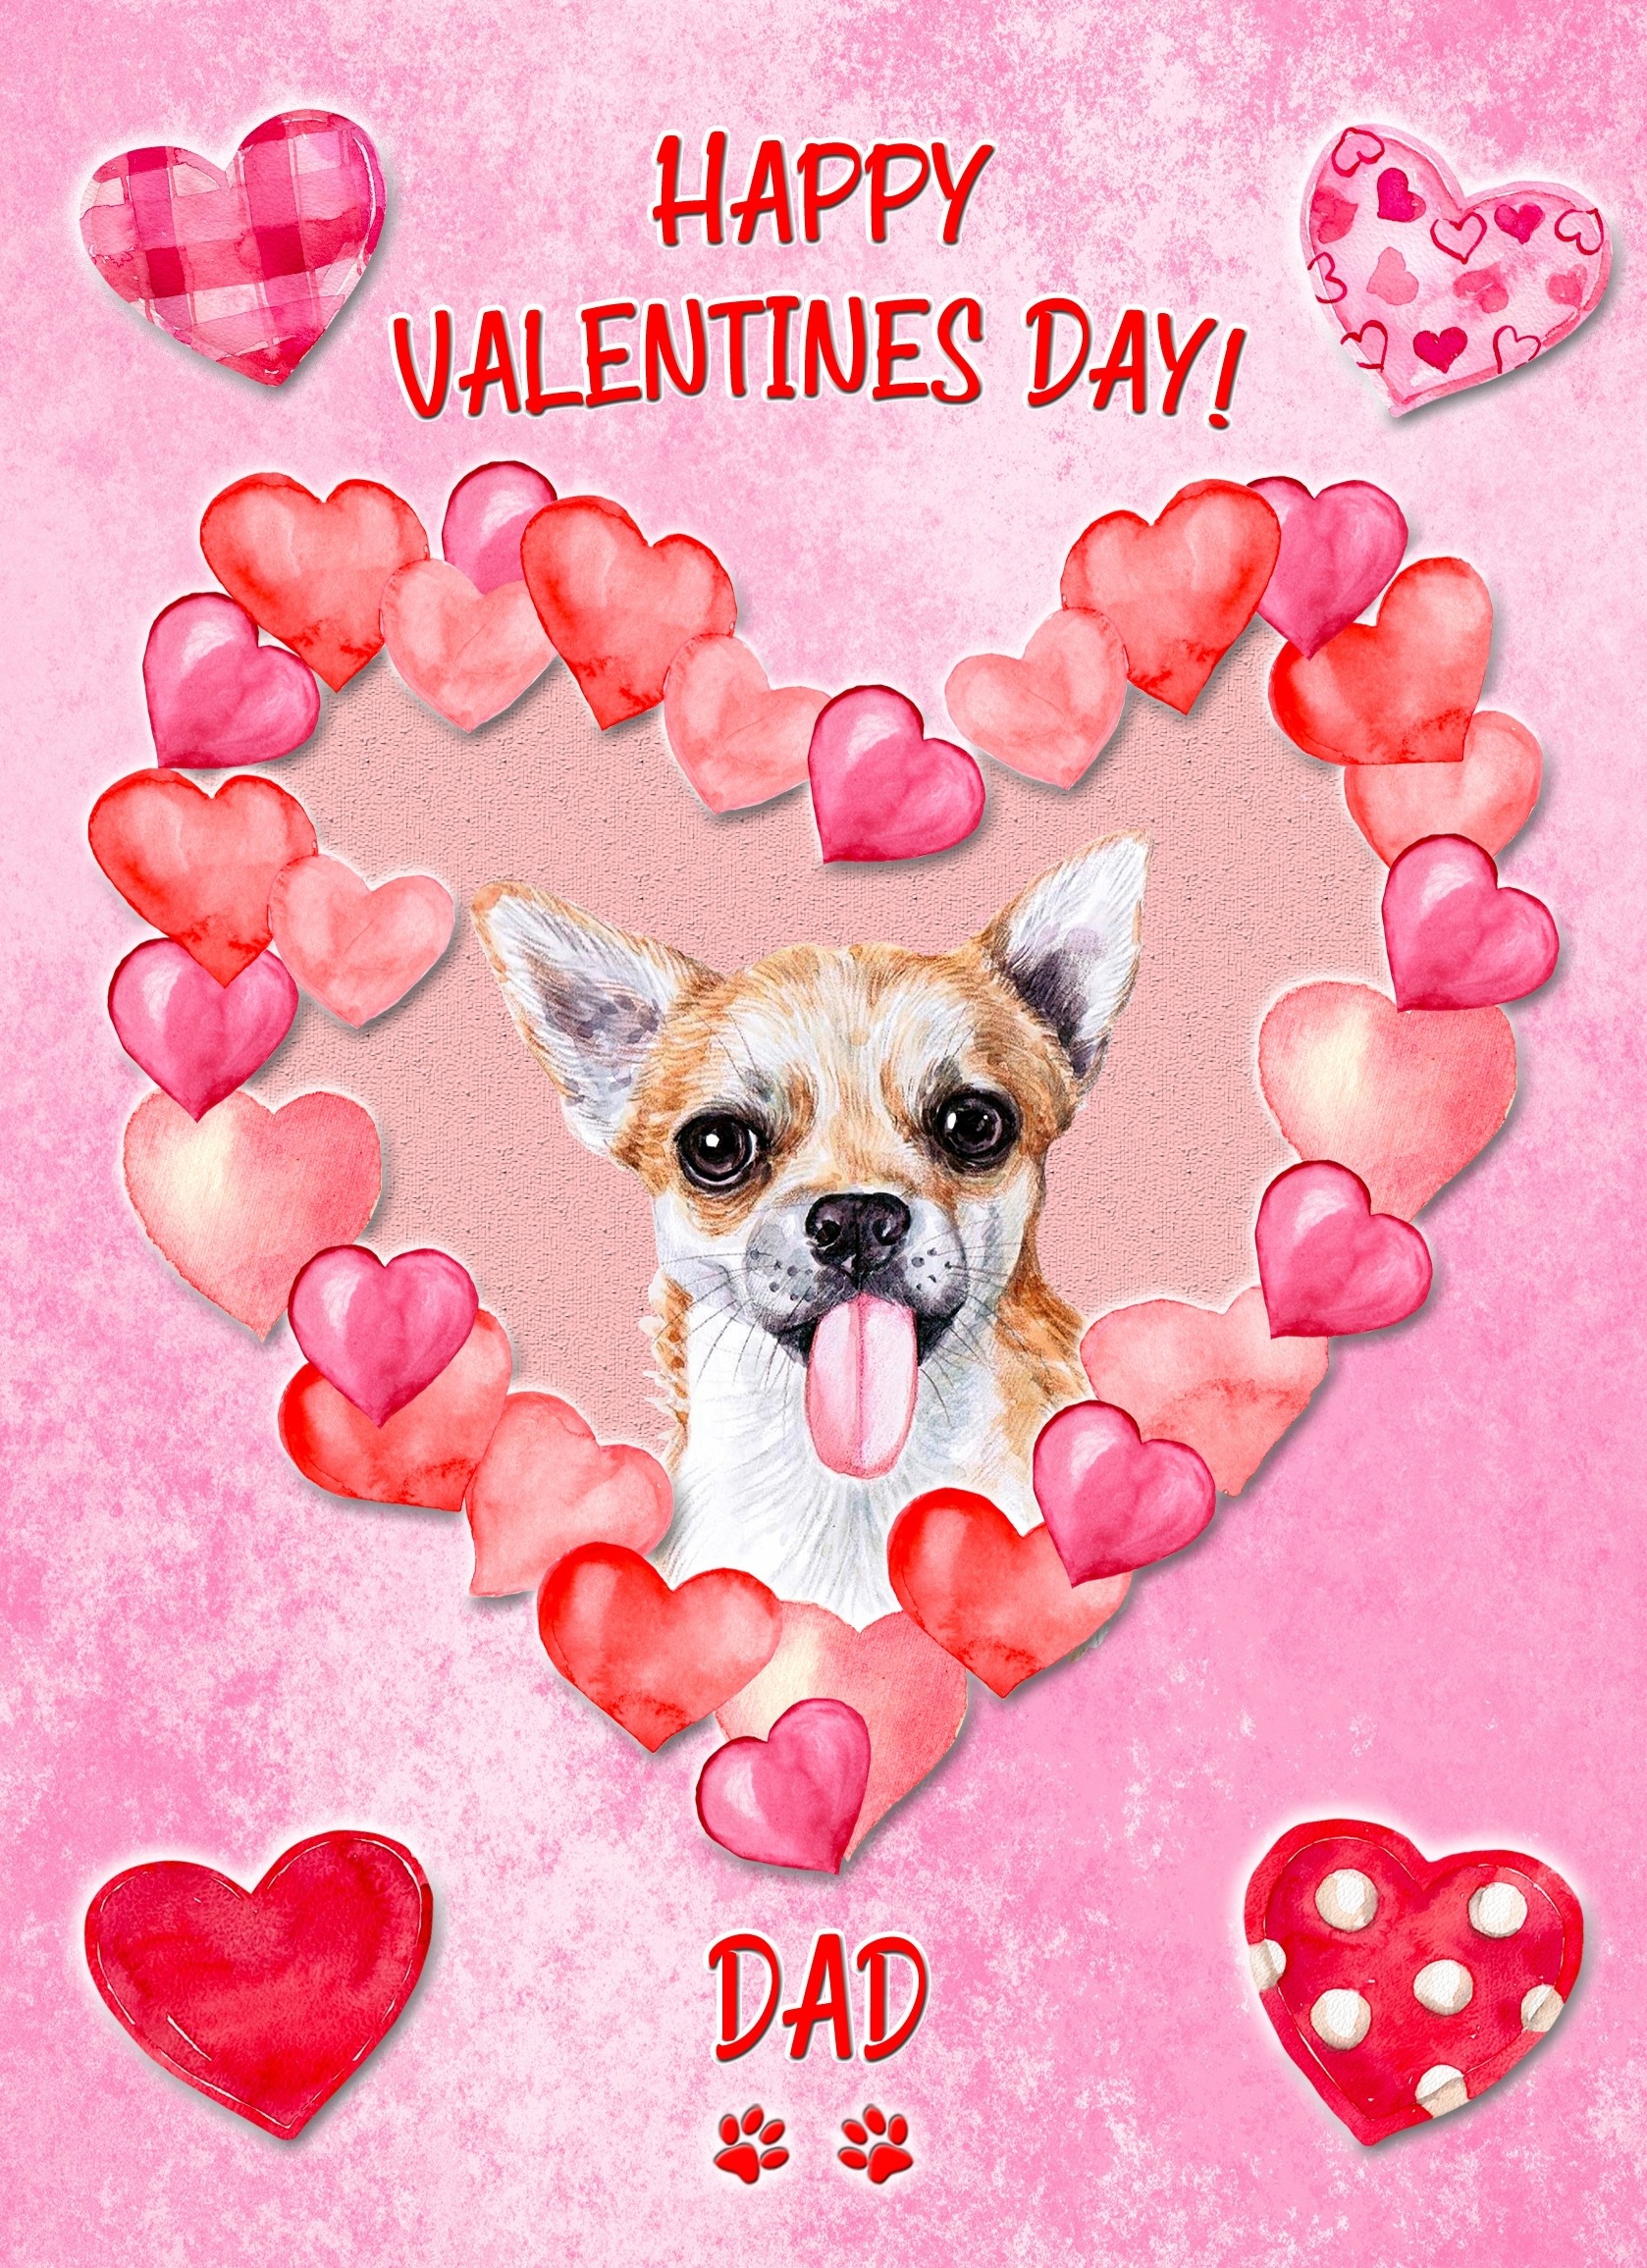 Chihuahua Dog Valentines Day Card (Happy Valentines, Dad)